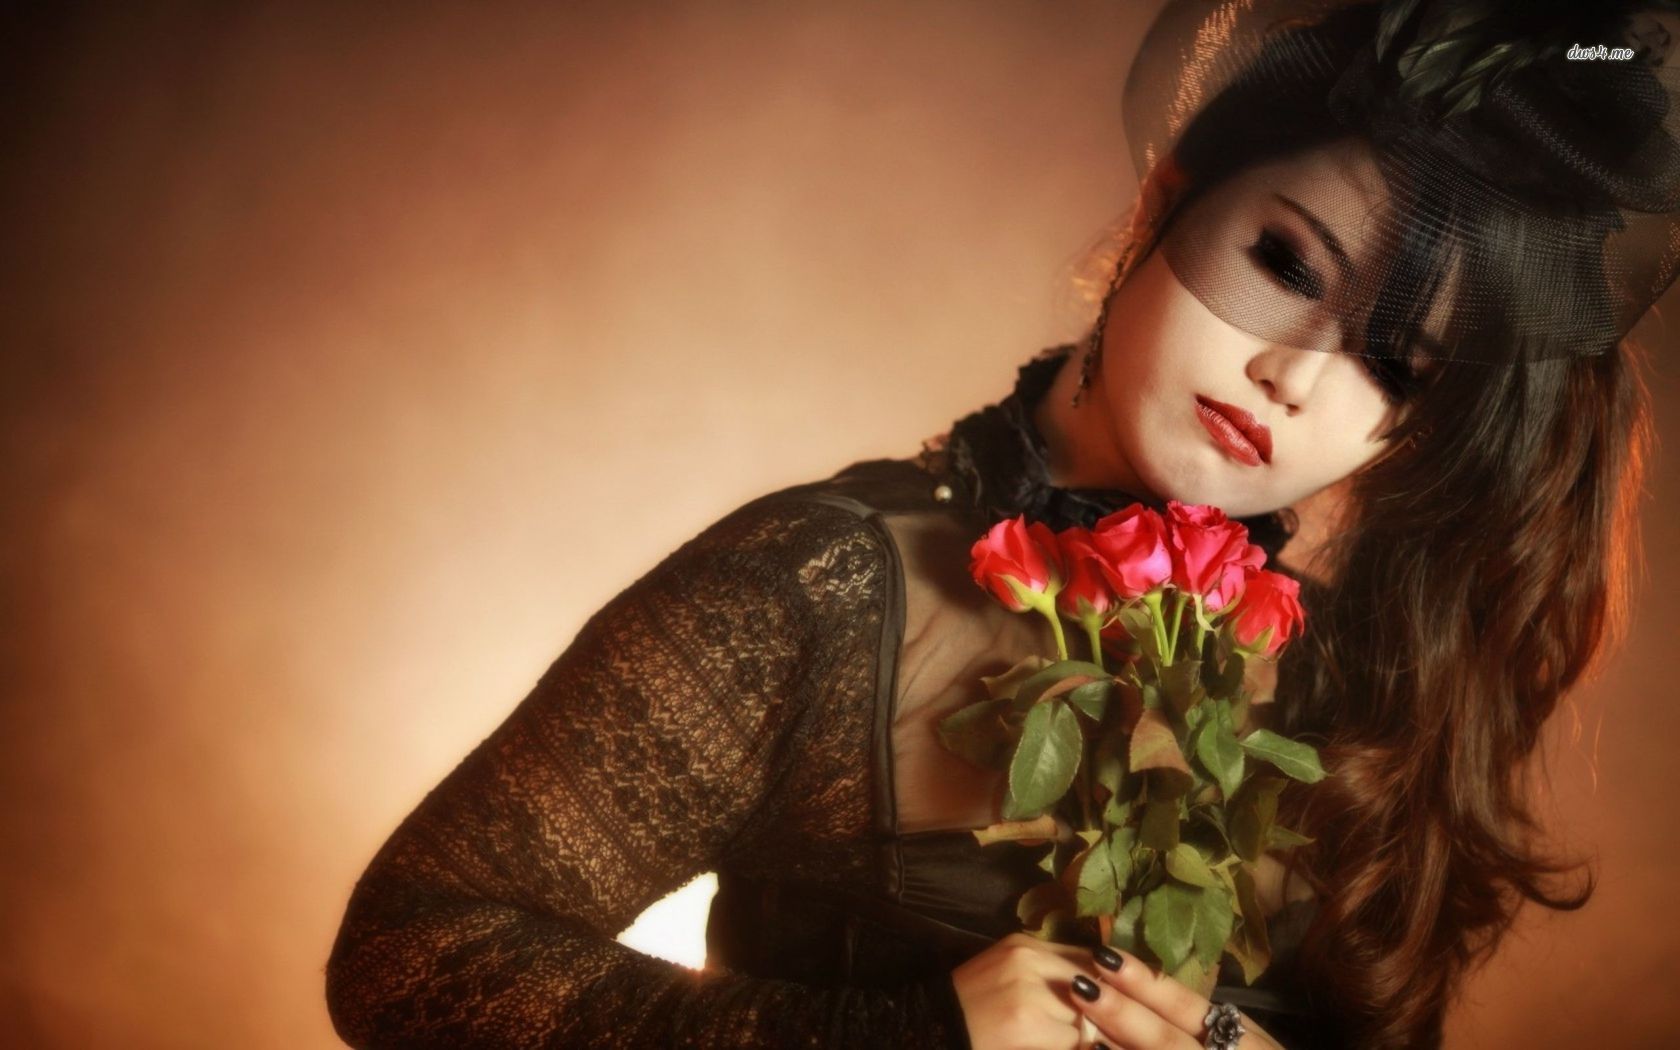 Woman holding a bouquet of red roses HD wallpaper. Women, Red roses, Rose wallpaper